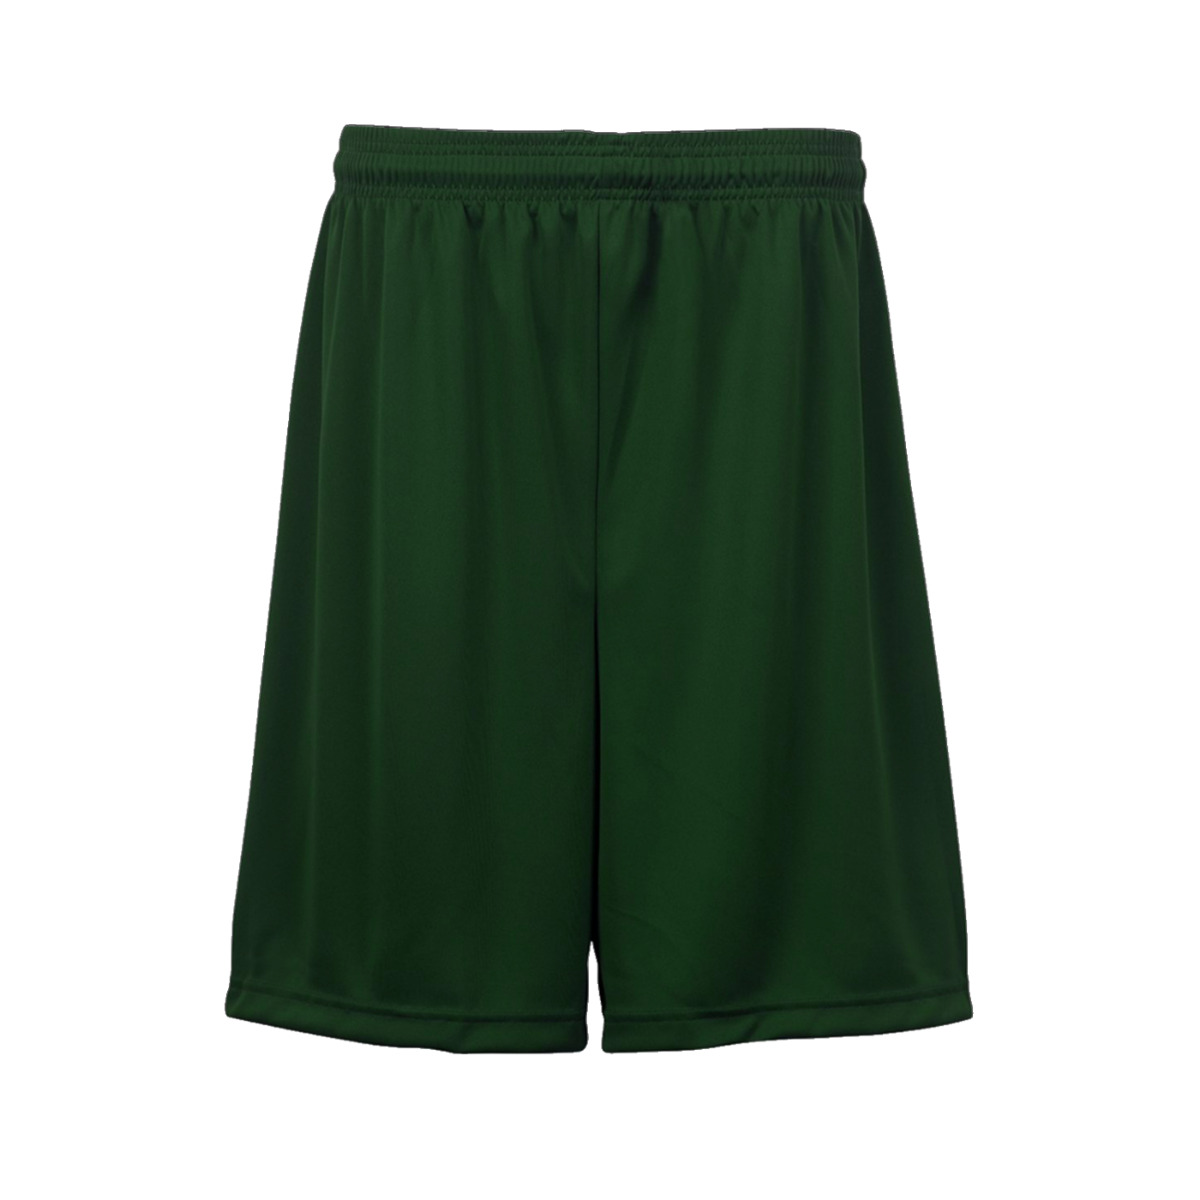 Badger Youth C2 B-core Performance Short Forest Green Md